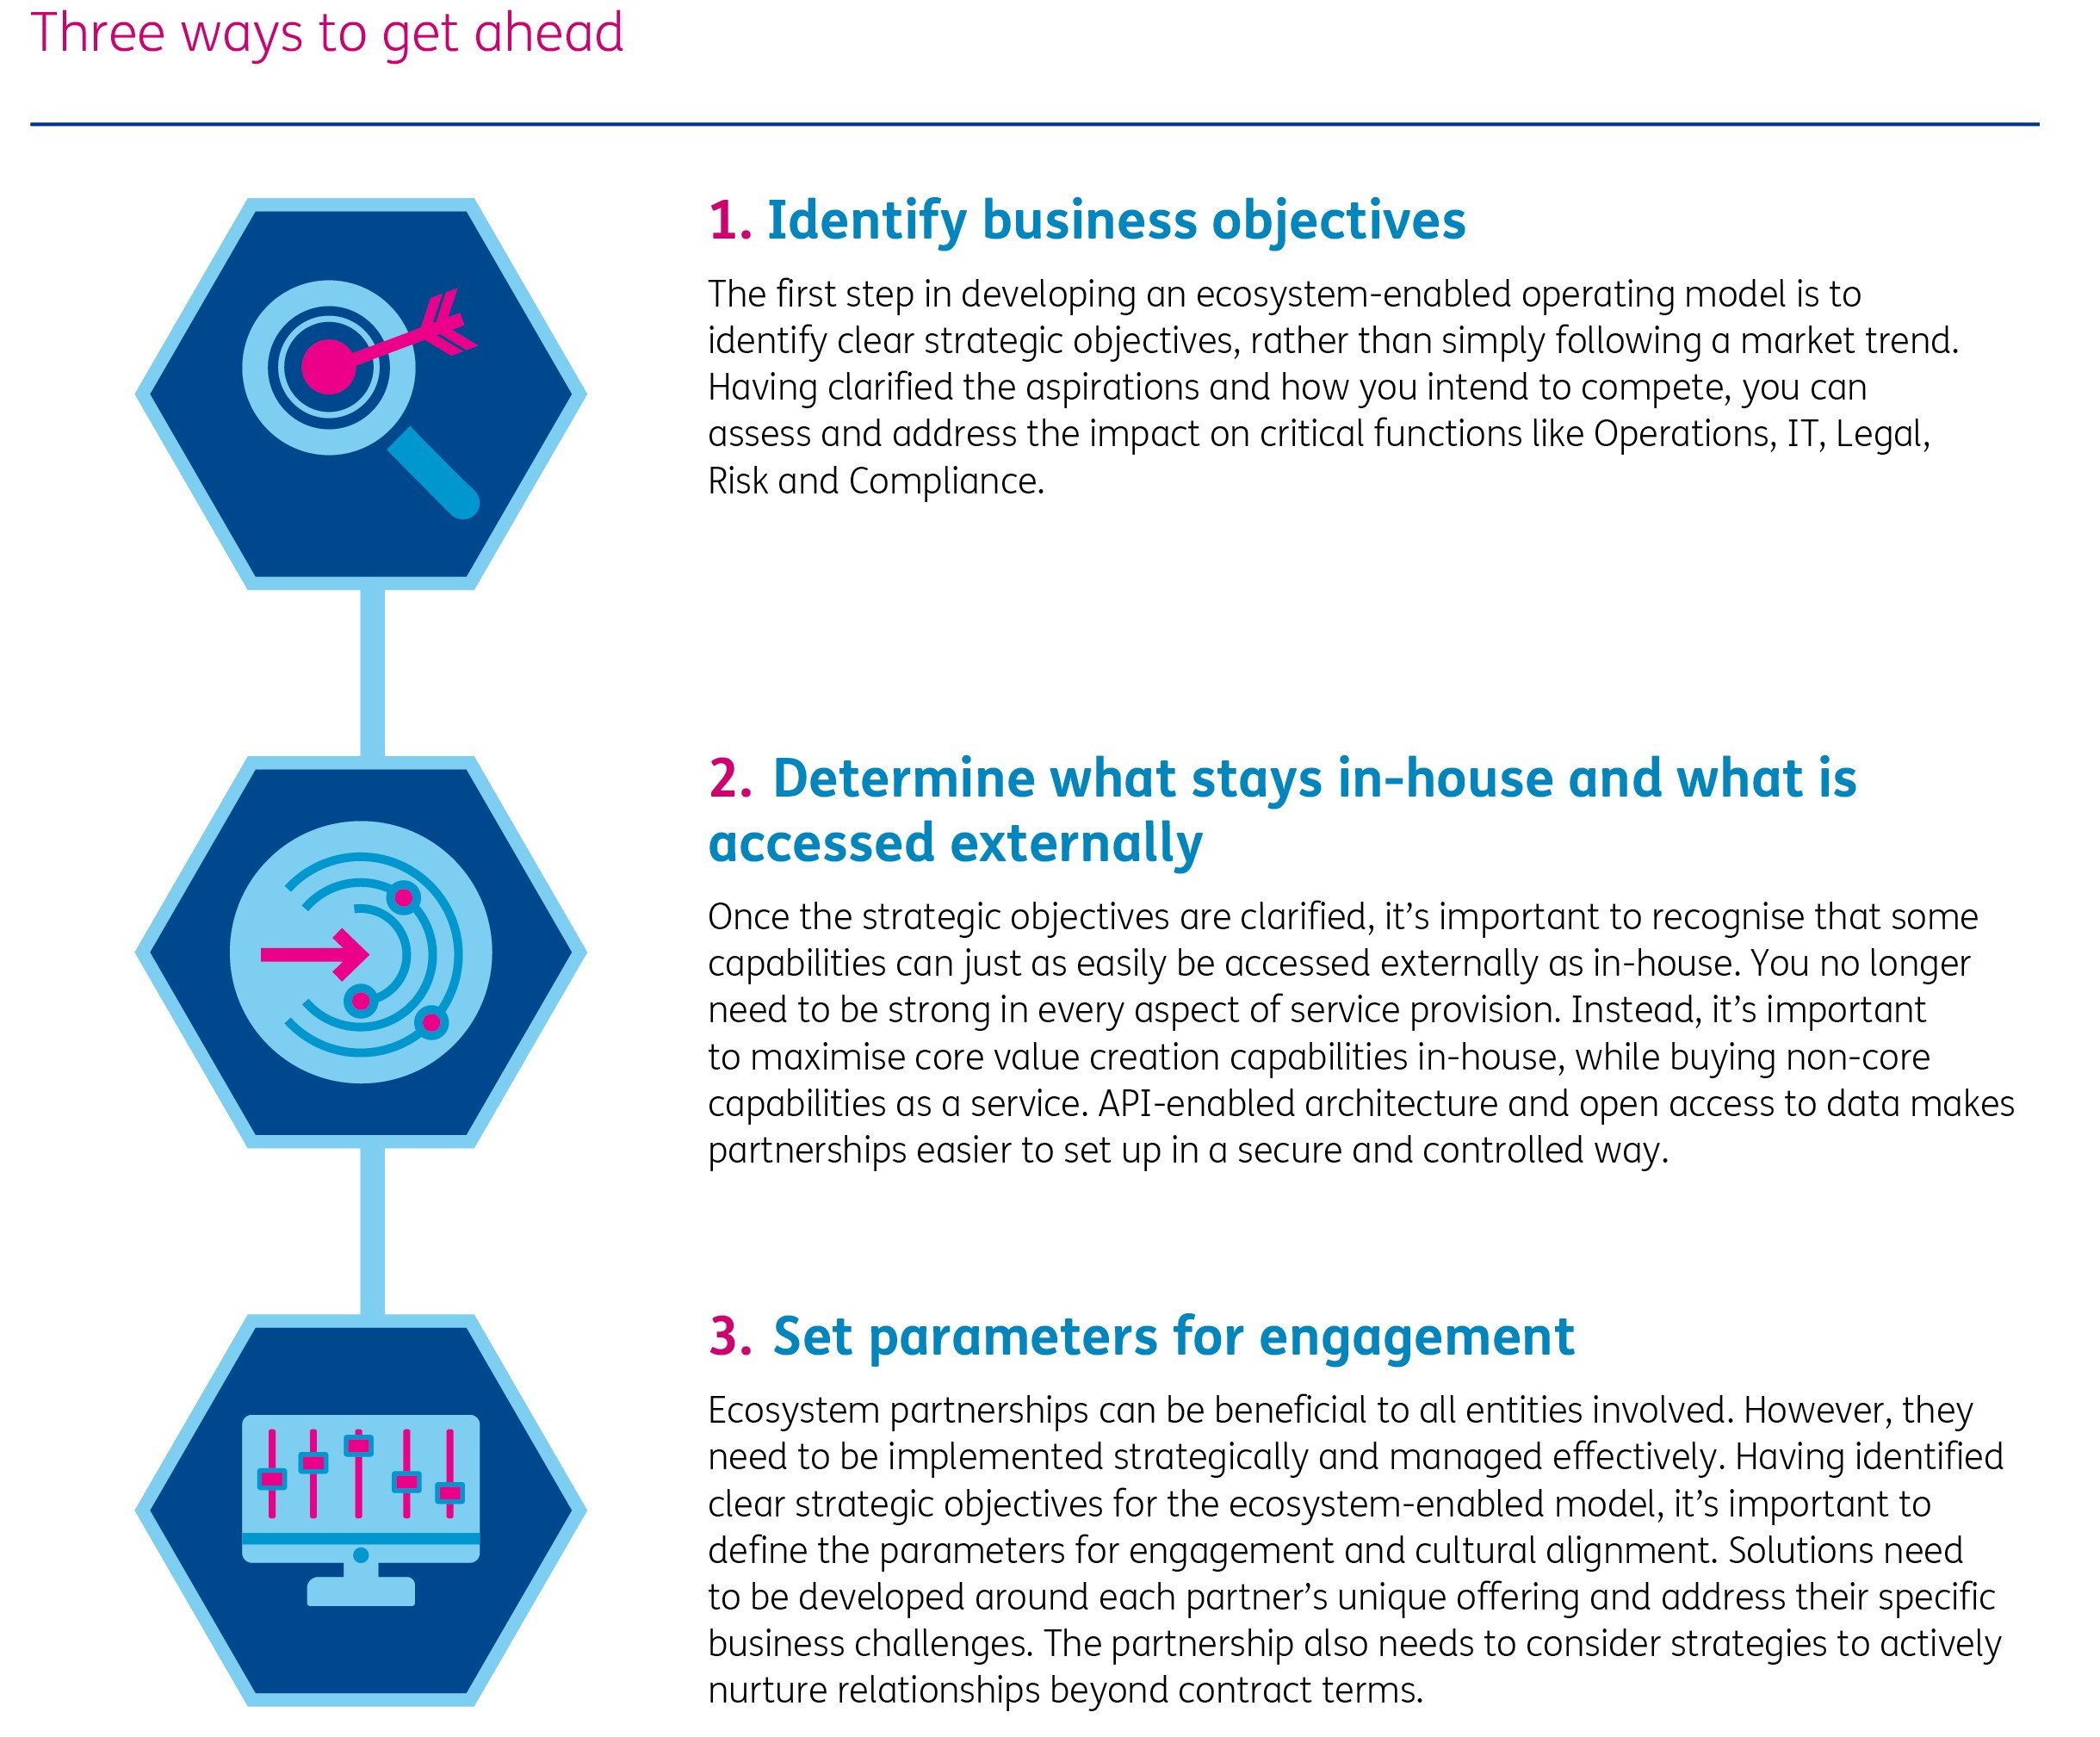 An infographic showing three ways for banks to get ahead: Identify Business objectives; decide what stays in-house and what is accessed externally; set parameters for engagement